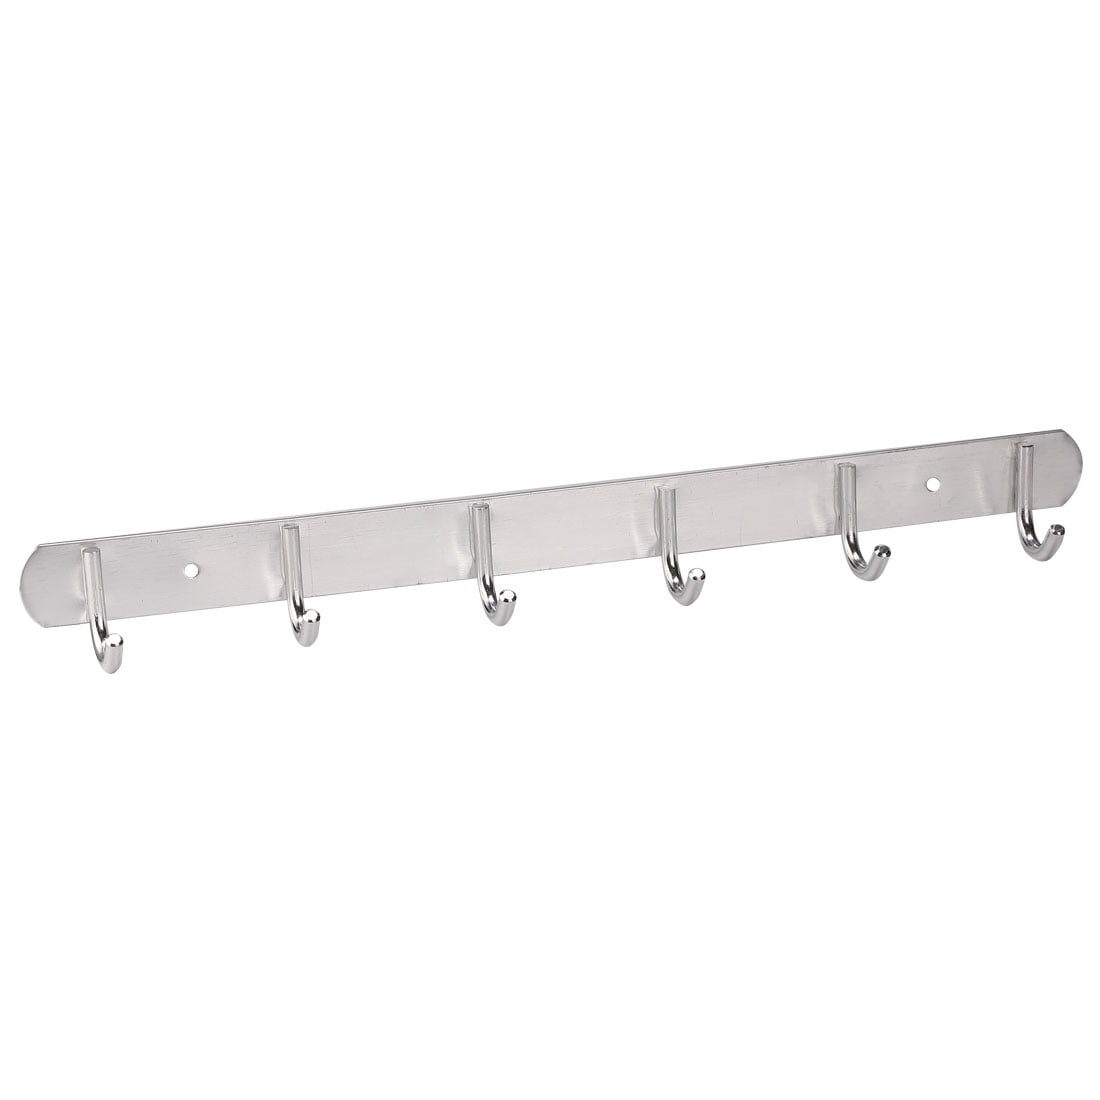 Stainless Steel Double Hook Wall Hanger Coat Clothes Bag Robe Holder Towel Rack 